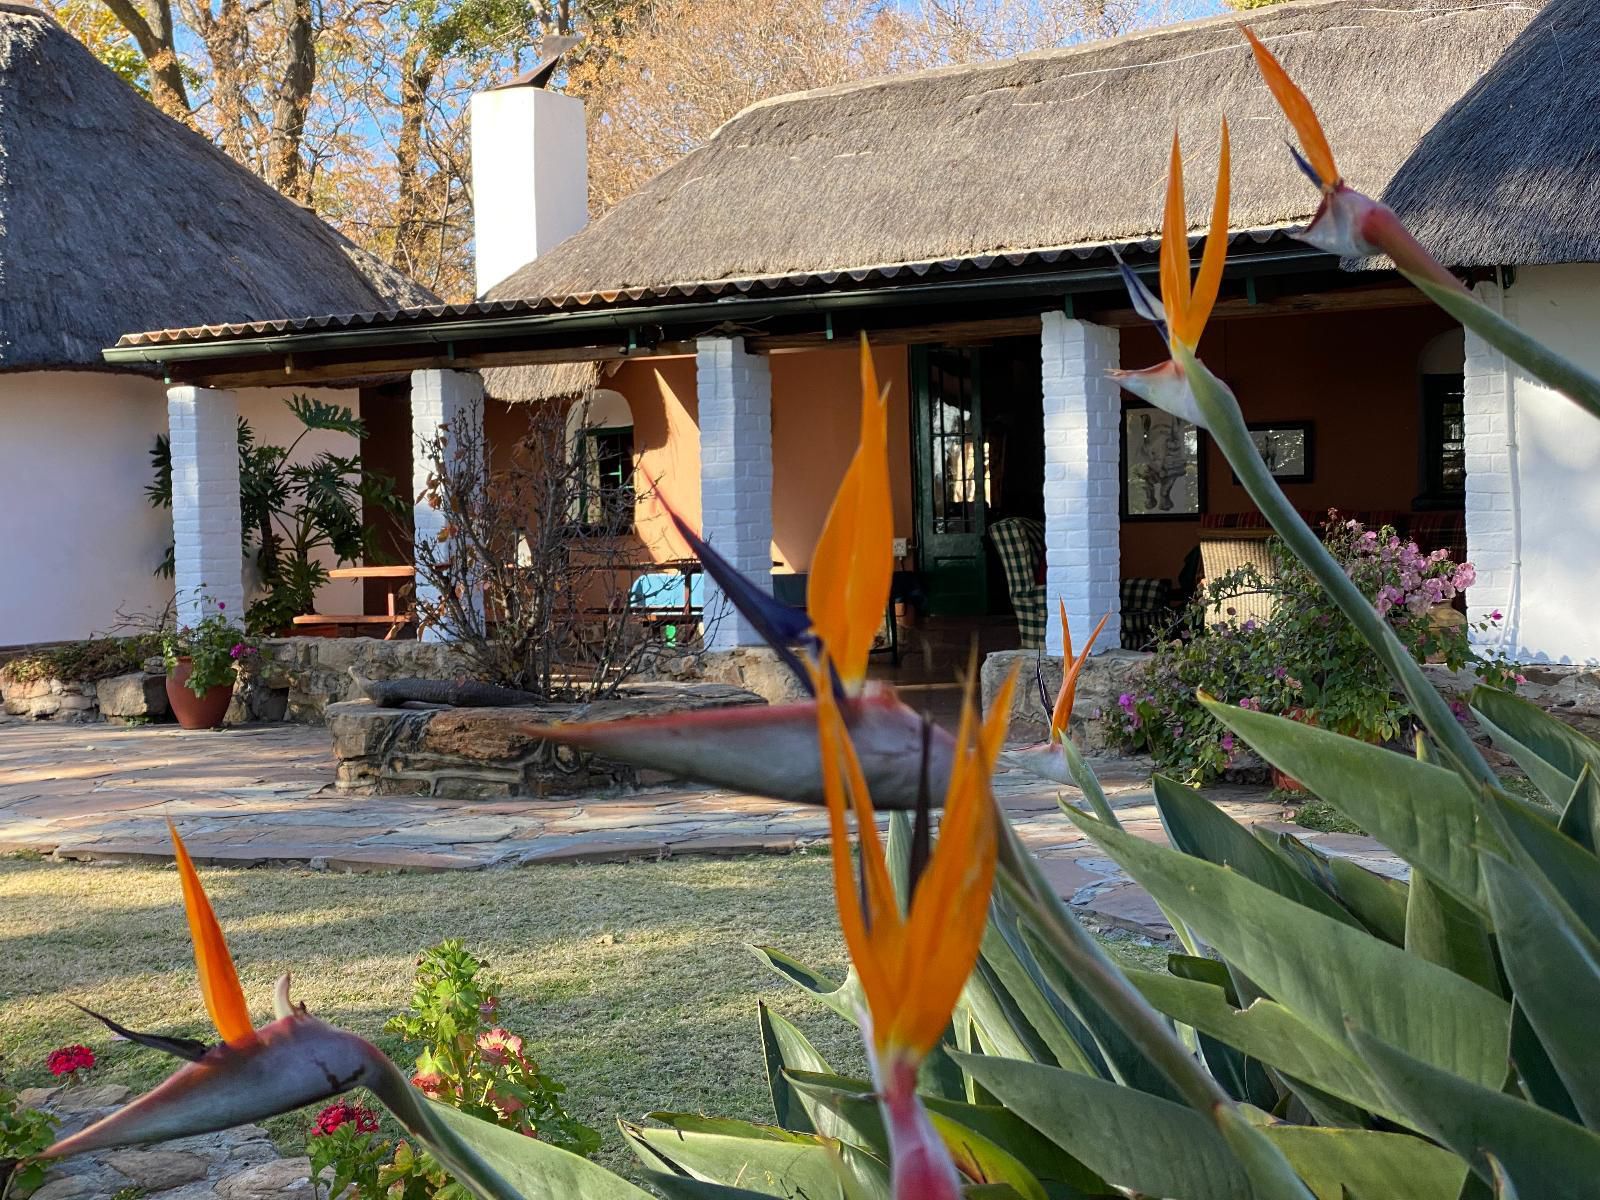 Waterberg Cottages Vaalwater Limpopo Province South Africa House, Building, Architecture, Plant, Nature